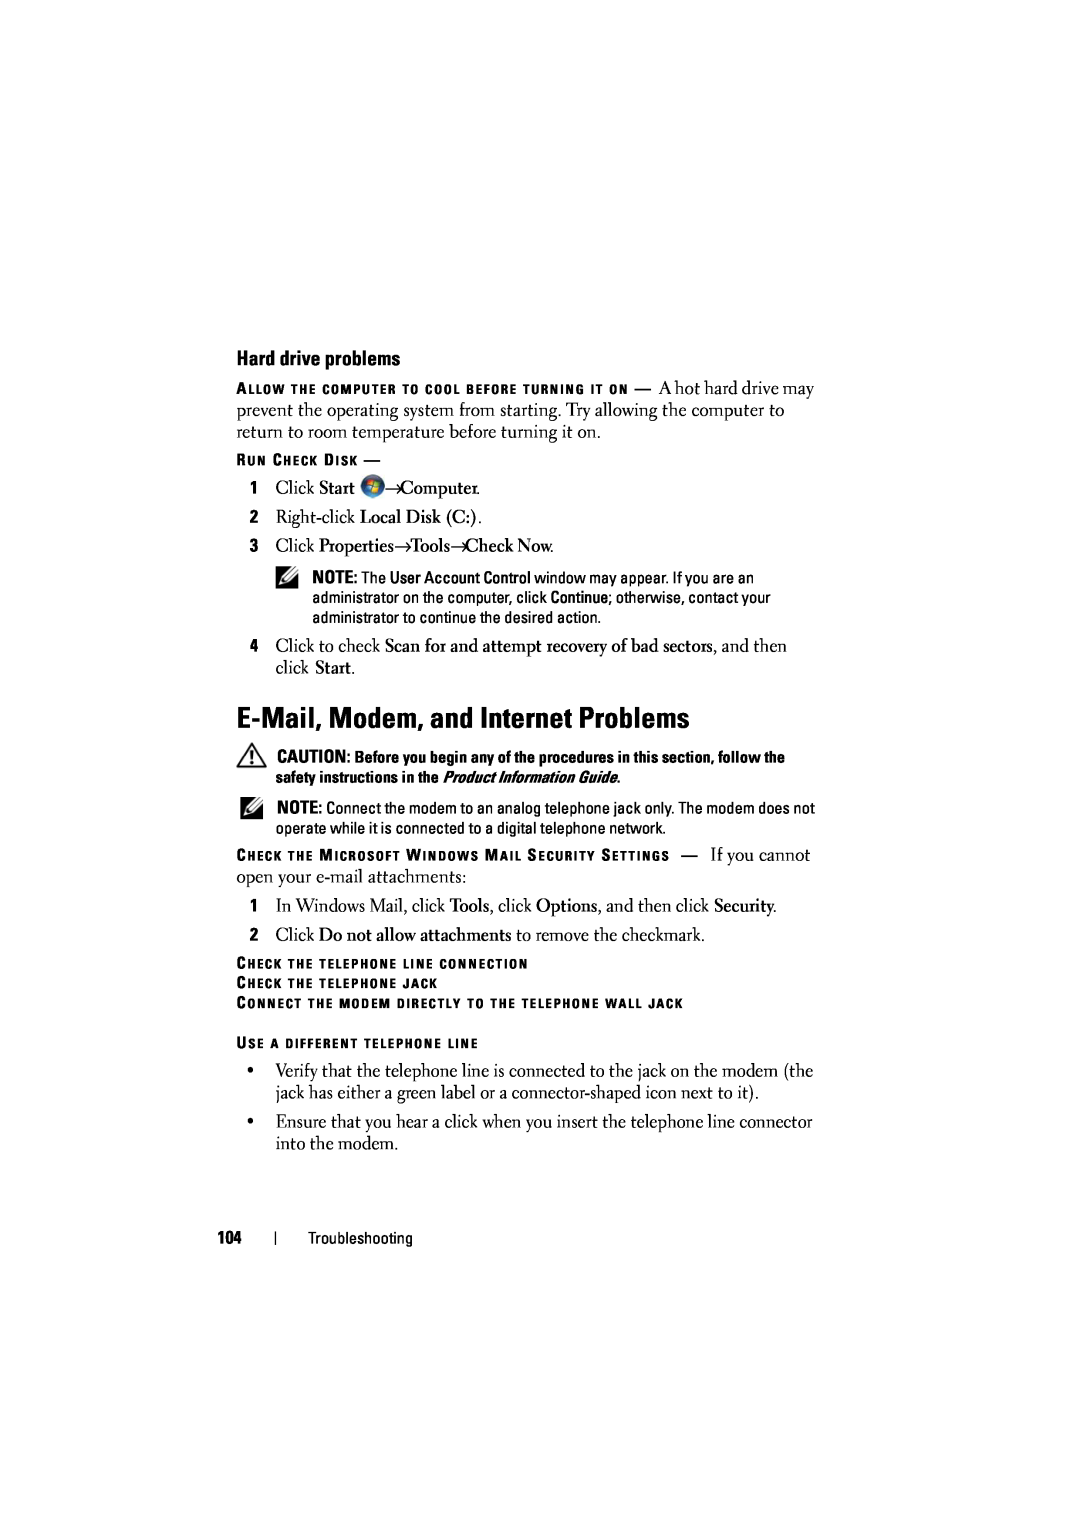 Dell 1525, 1526 owner manual E-Mail, Modem, and Internet Problems, Hard drive problems 